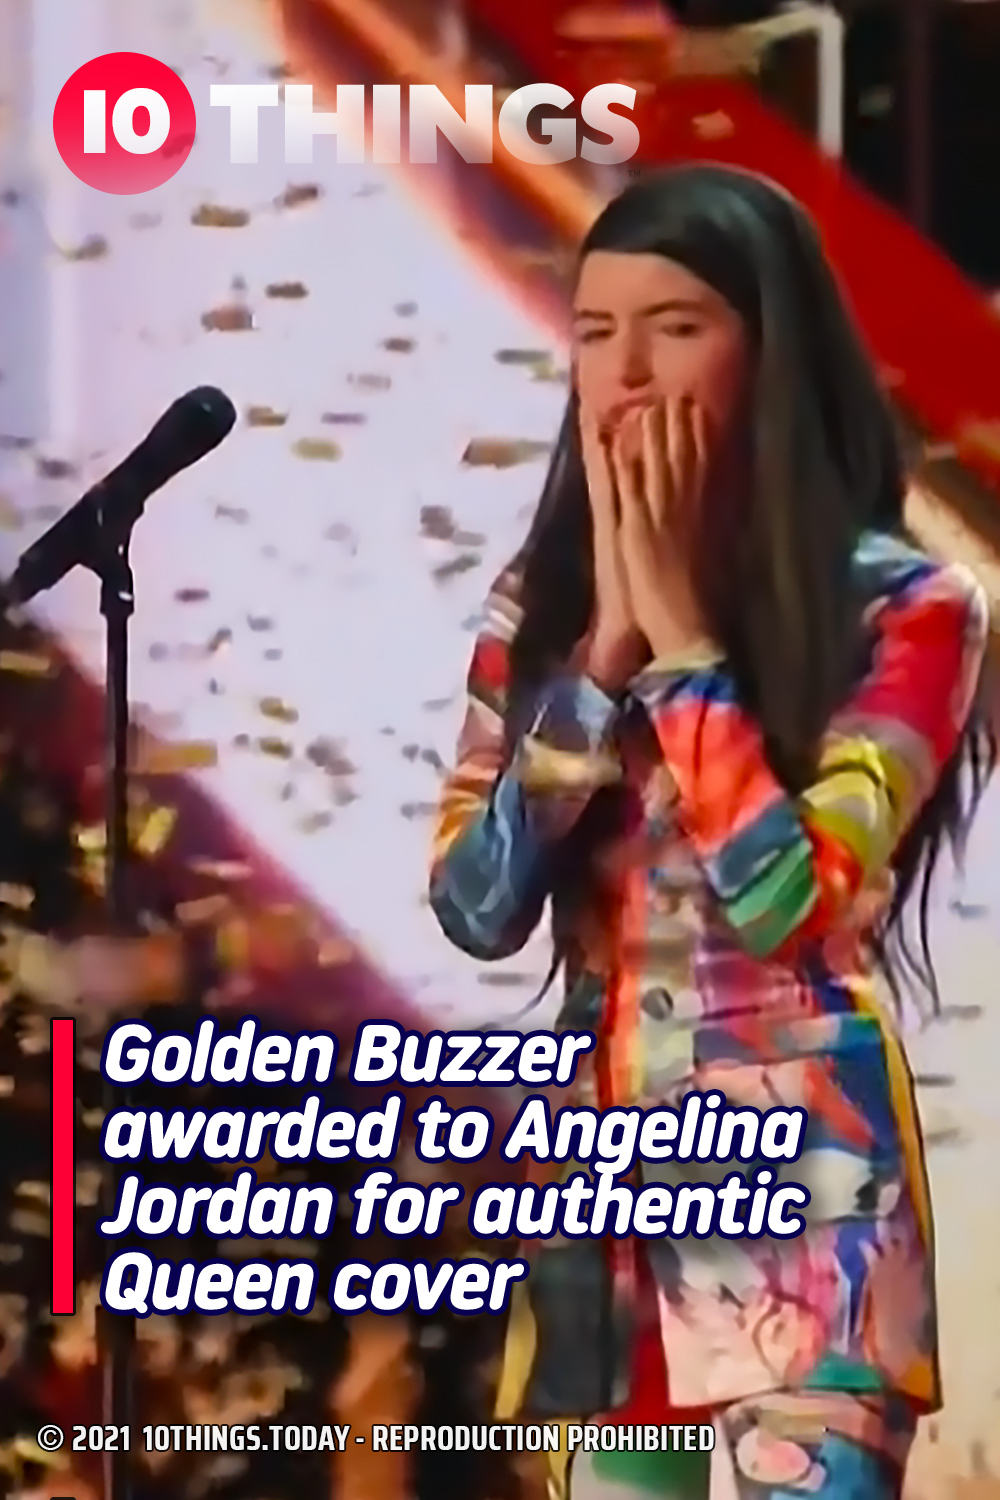 Golden Buzzer awarded to Angelina Jordan for authentic Queen cover